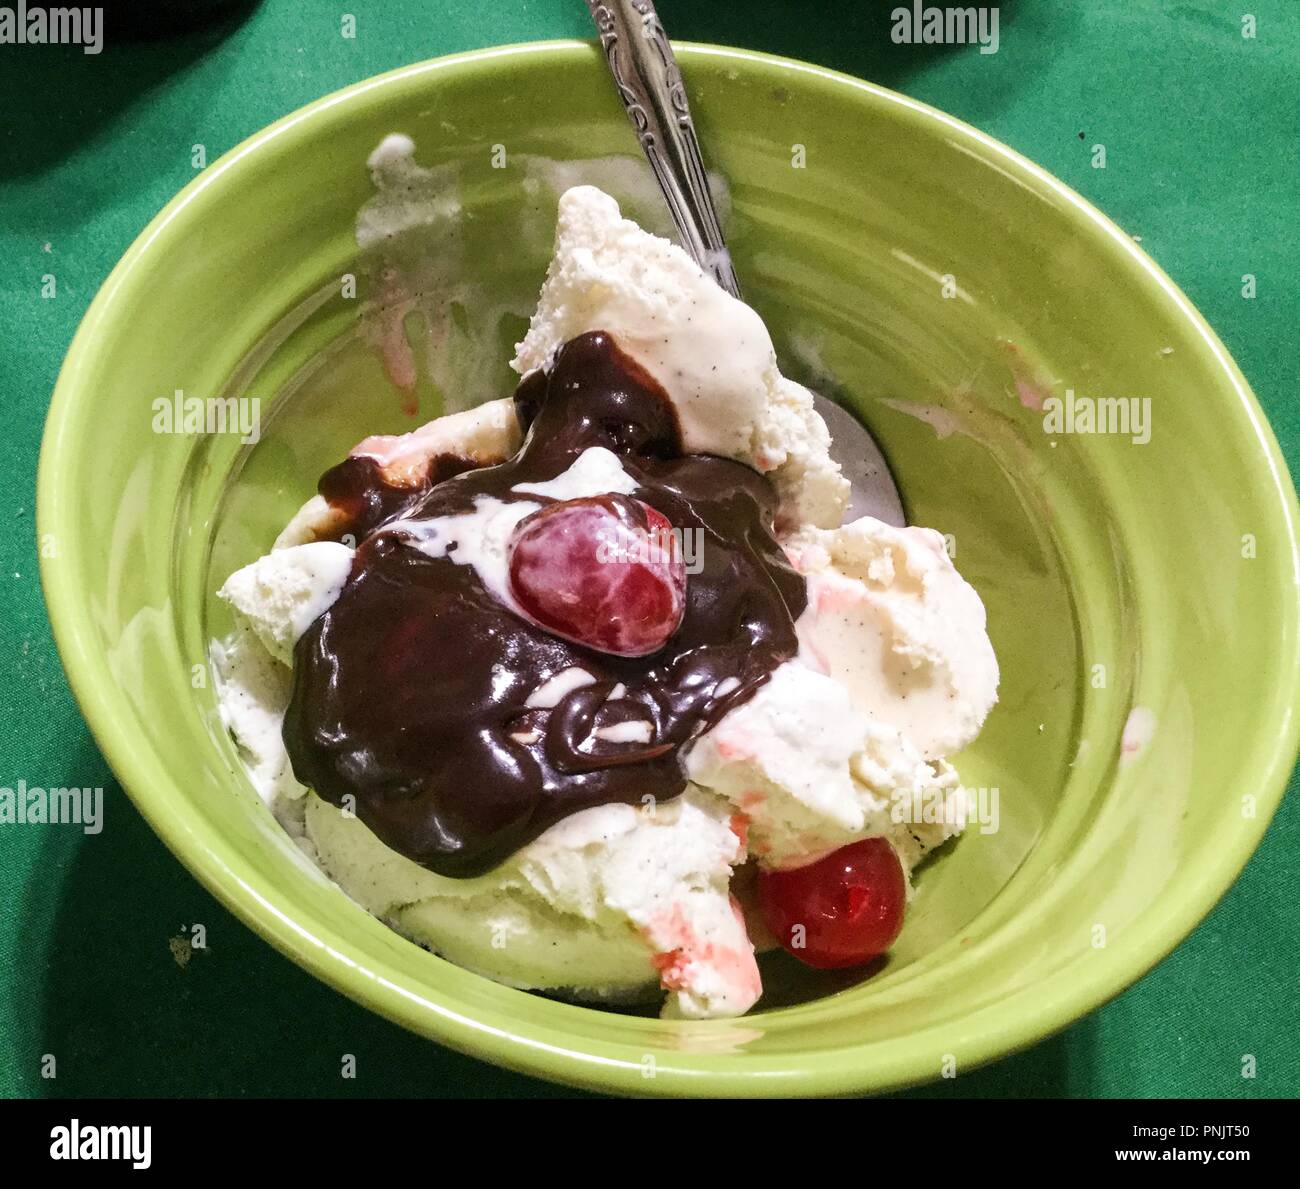 Ice cream with banana, cherries and hot fudge sauce in light green bowel with spoon on dark green background. Stock Photo